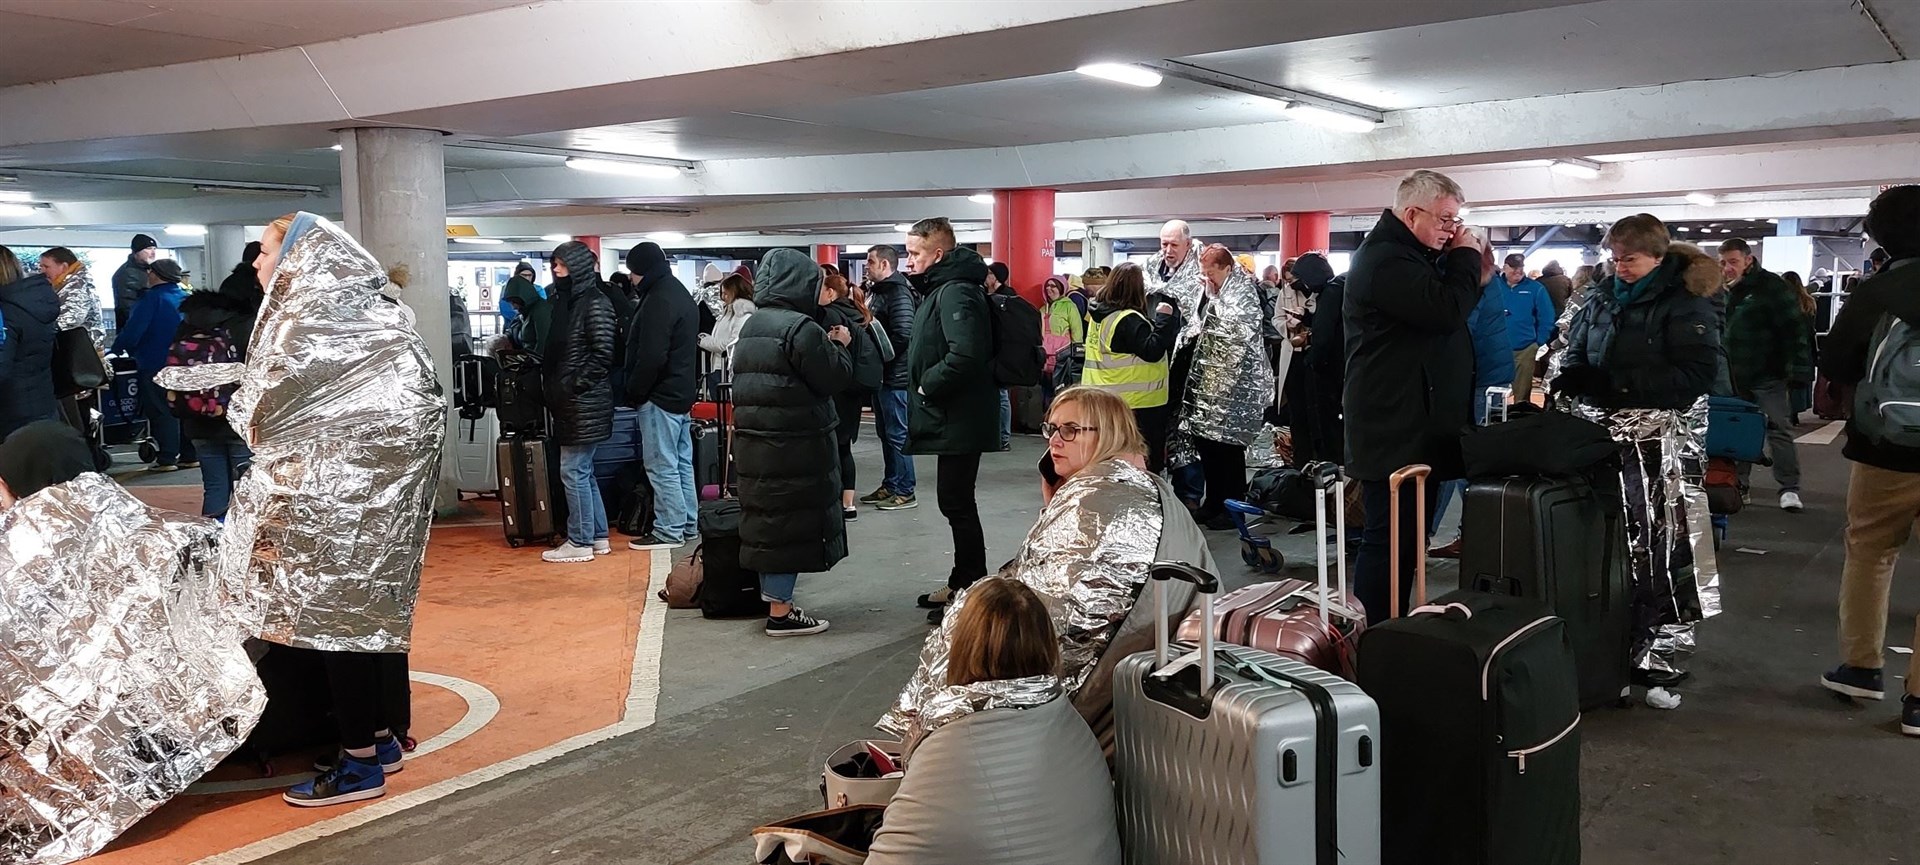 Passengers are waiting as some flights are being cancelled.